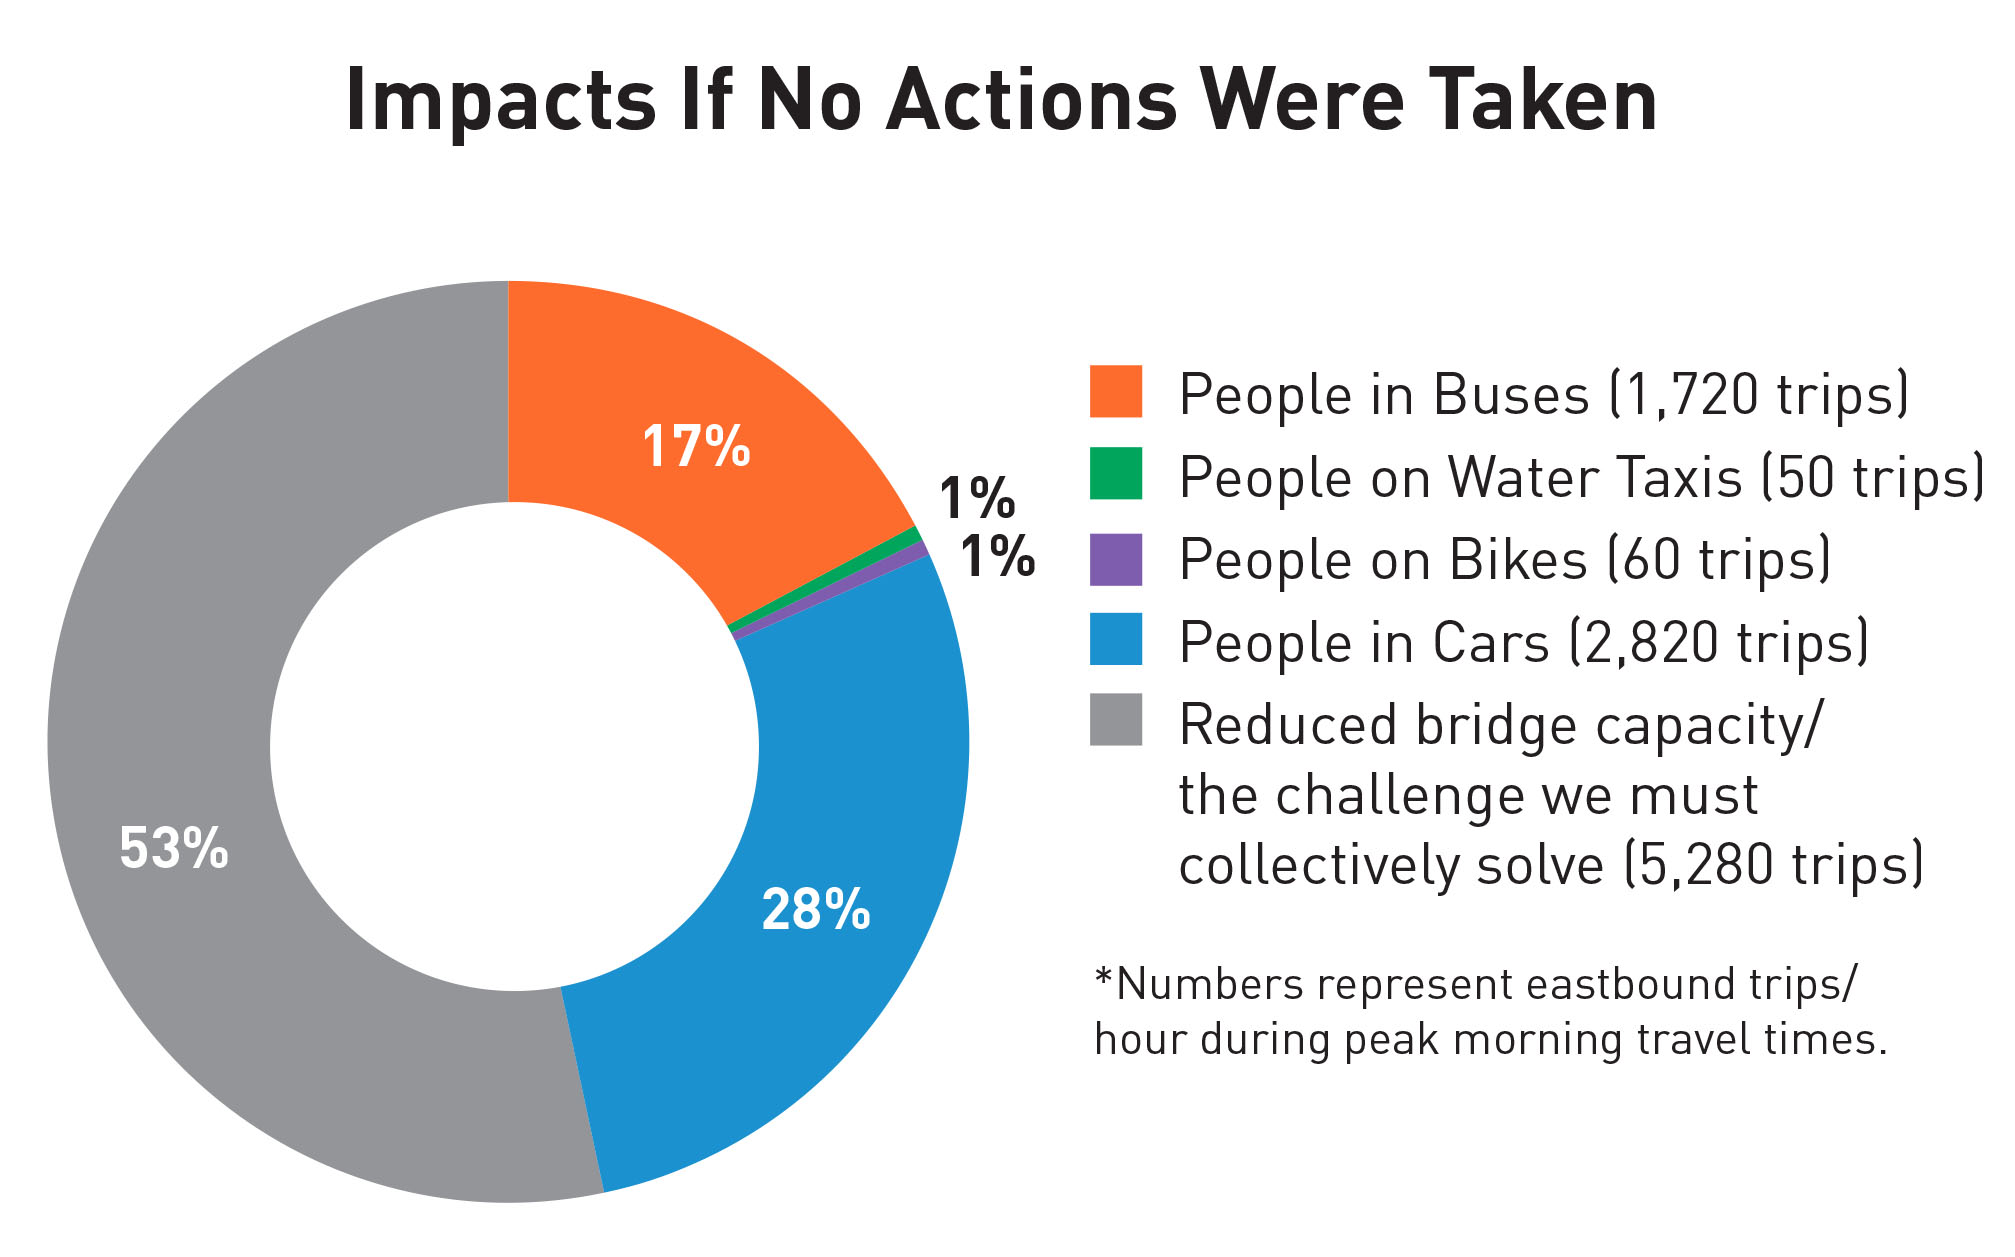 Pie chart showing impact if no actions were taken now that the West Seattle High-Rise Bridge is closed. 17% people in buses, 28% people in cars, 1% people on water taxis, 1% people in cars, 53% reduced bridge capacity. Numbers represent eastbound trips per hour during peak morning travel times